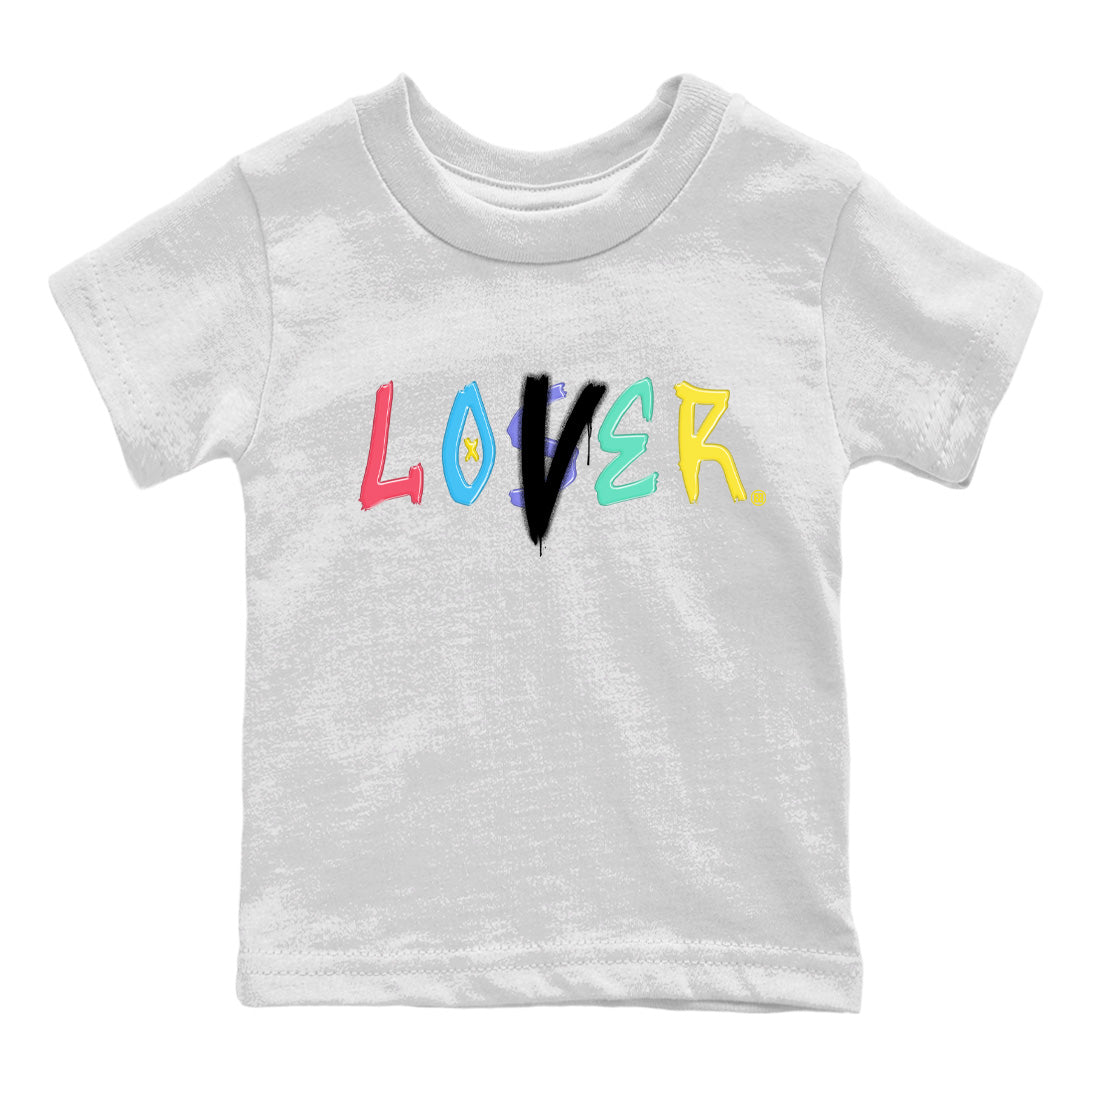 Dunk Easter Candy Sneaker Match Tees Loser Lover Streetwear Sneaker Shirt Holiday Easter T-Shirt Sneaker Release Tees Kids Shirts White 2